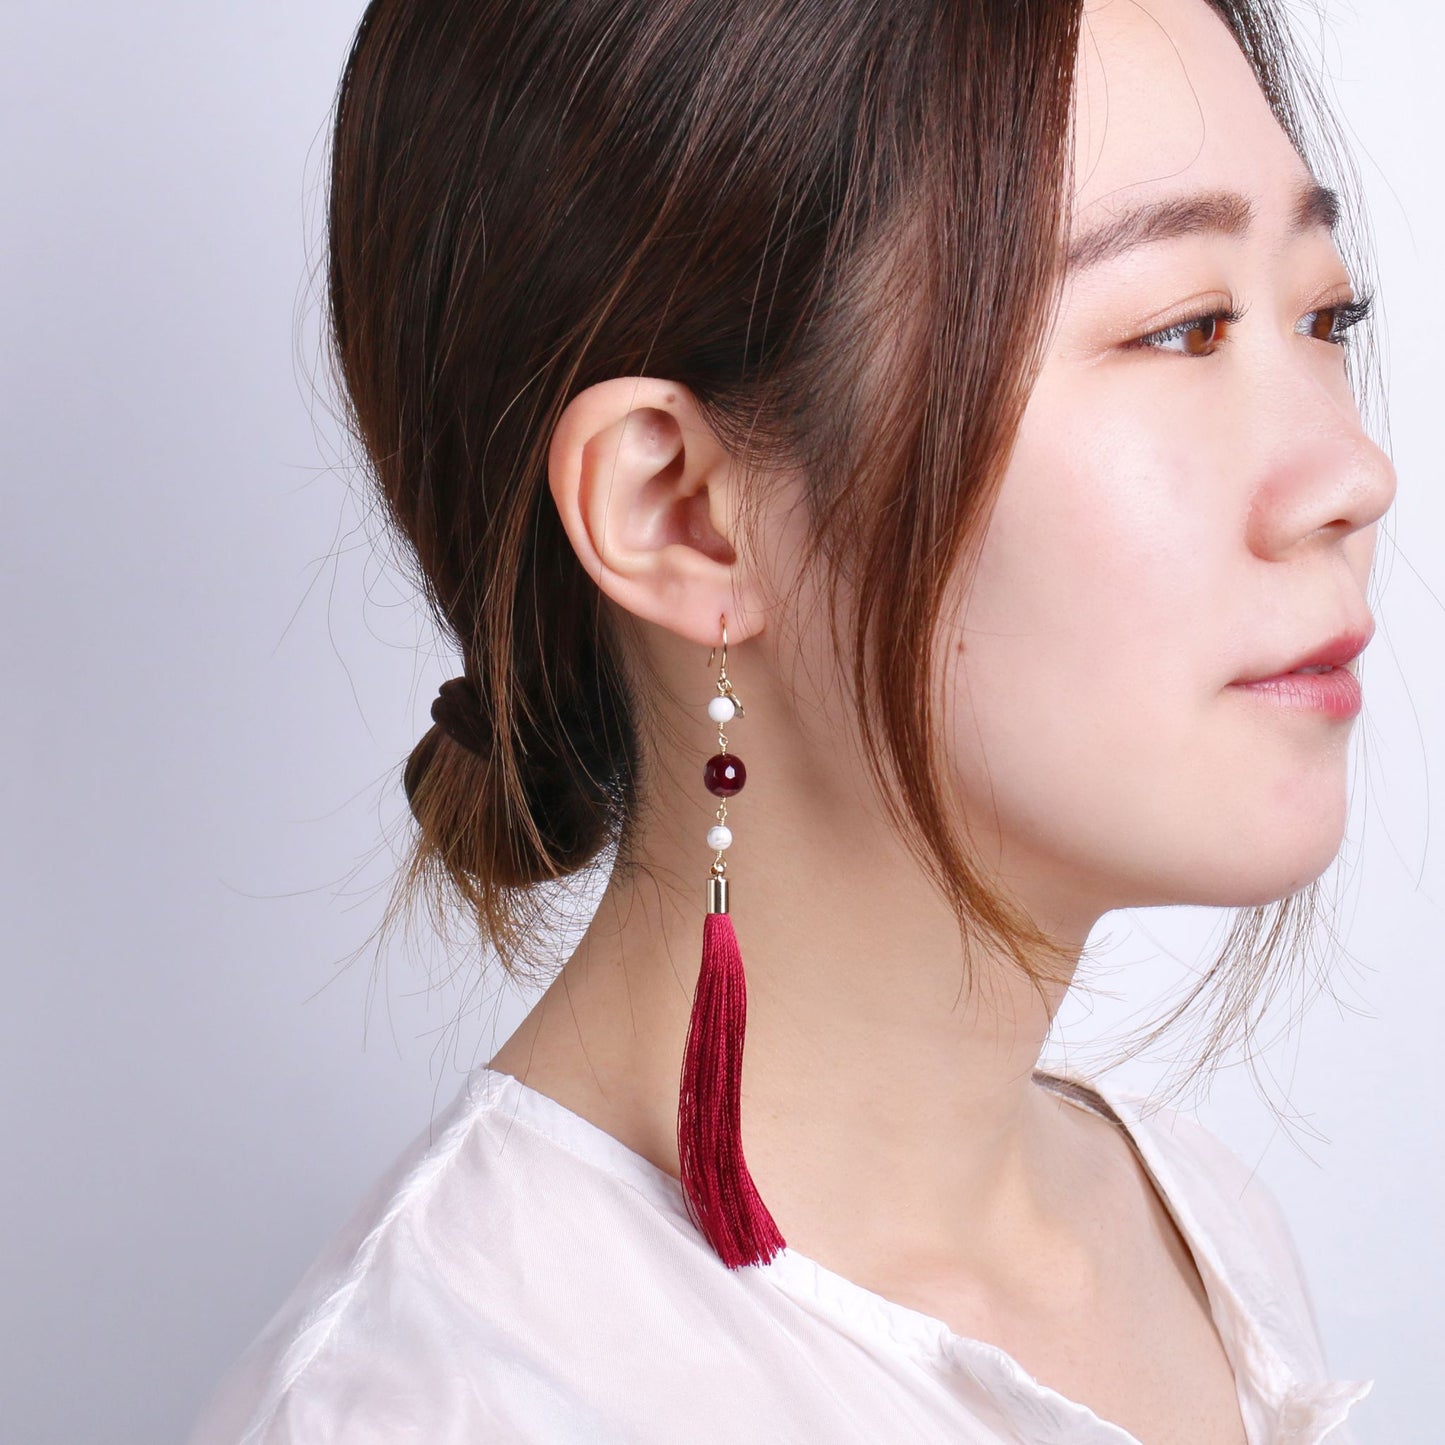 Color -chednony, Howlite and Tassel's hook piercings